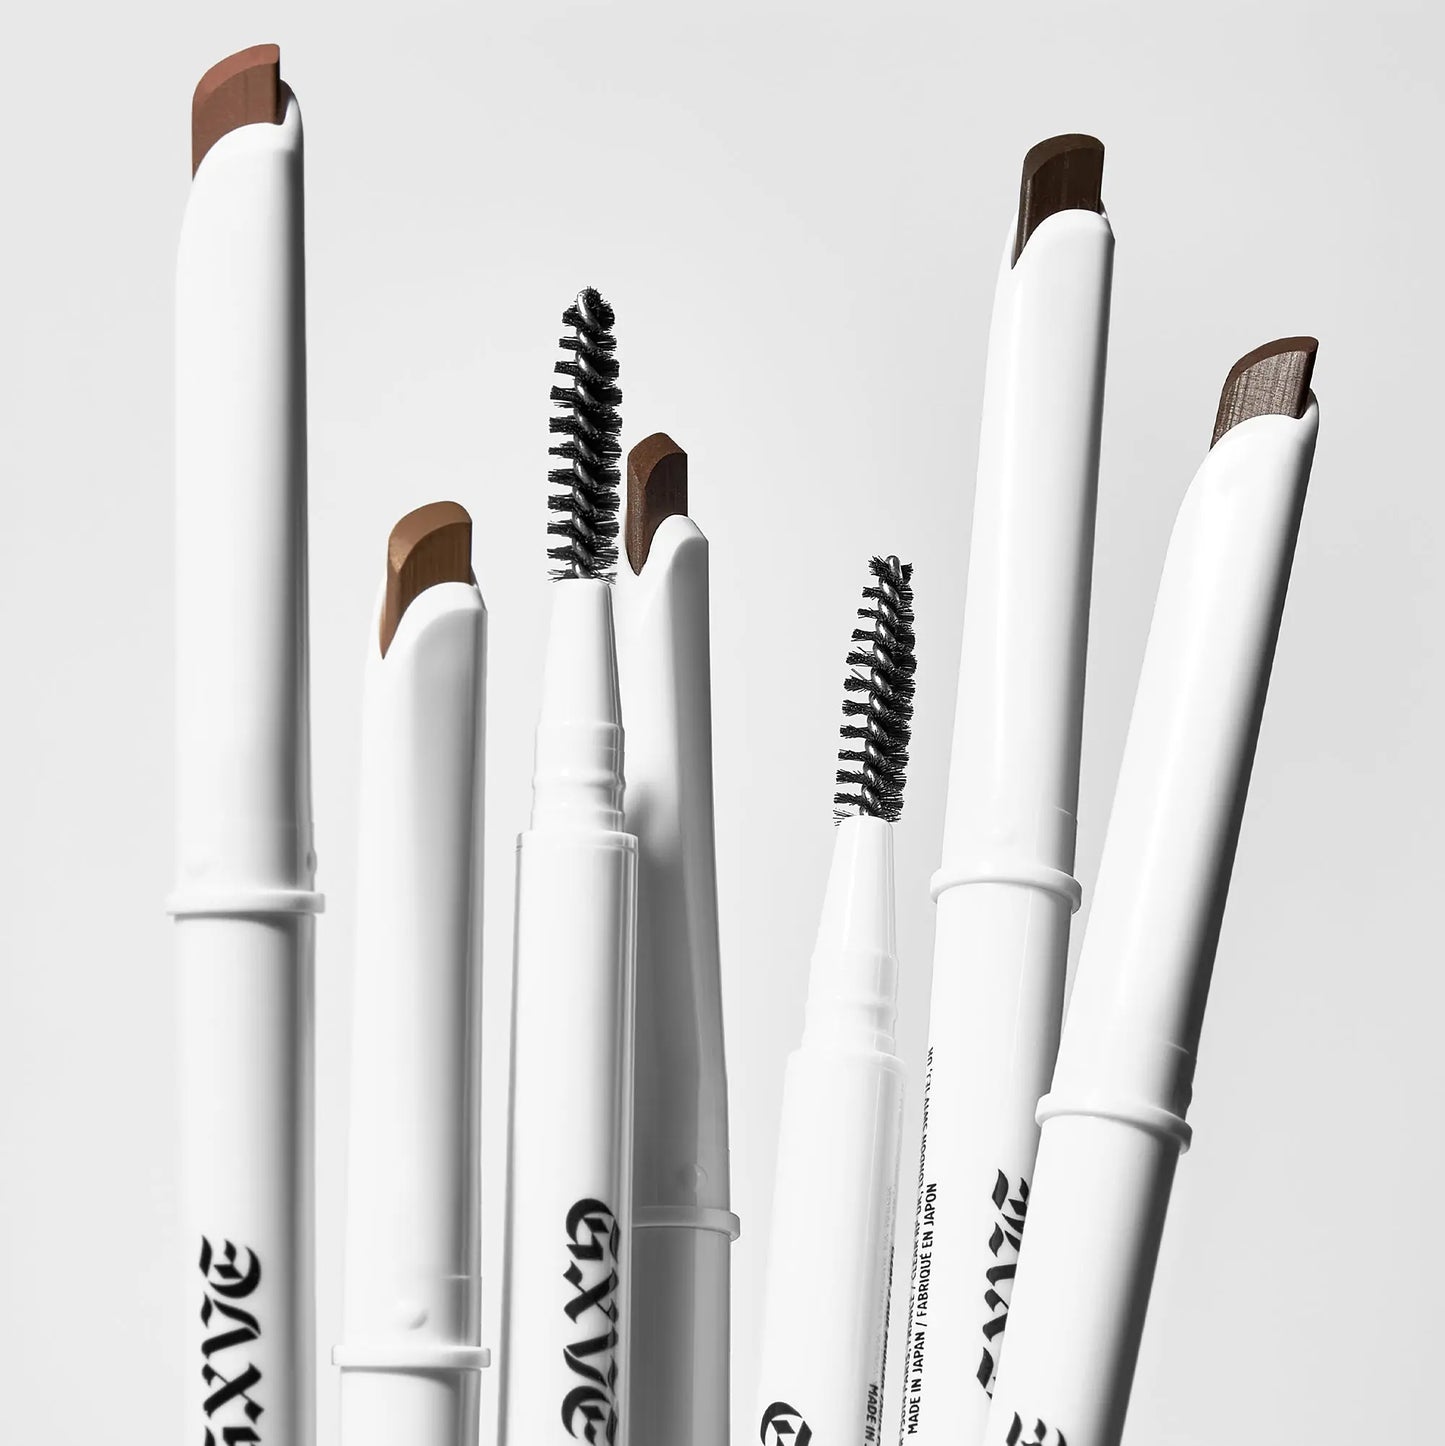 GXVE 3 - Instant Definition Sculpting Eyebrow Pencil For Bold Brows